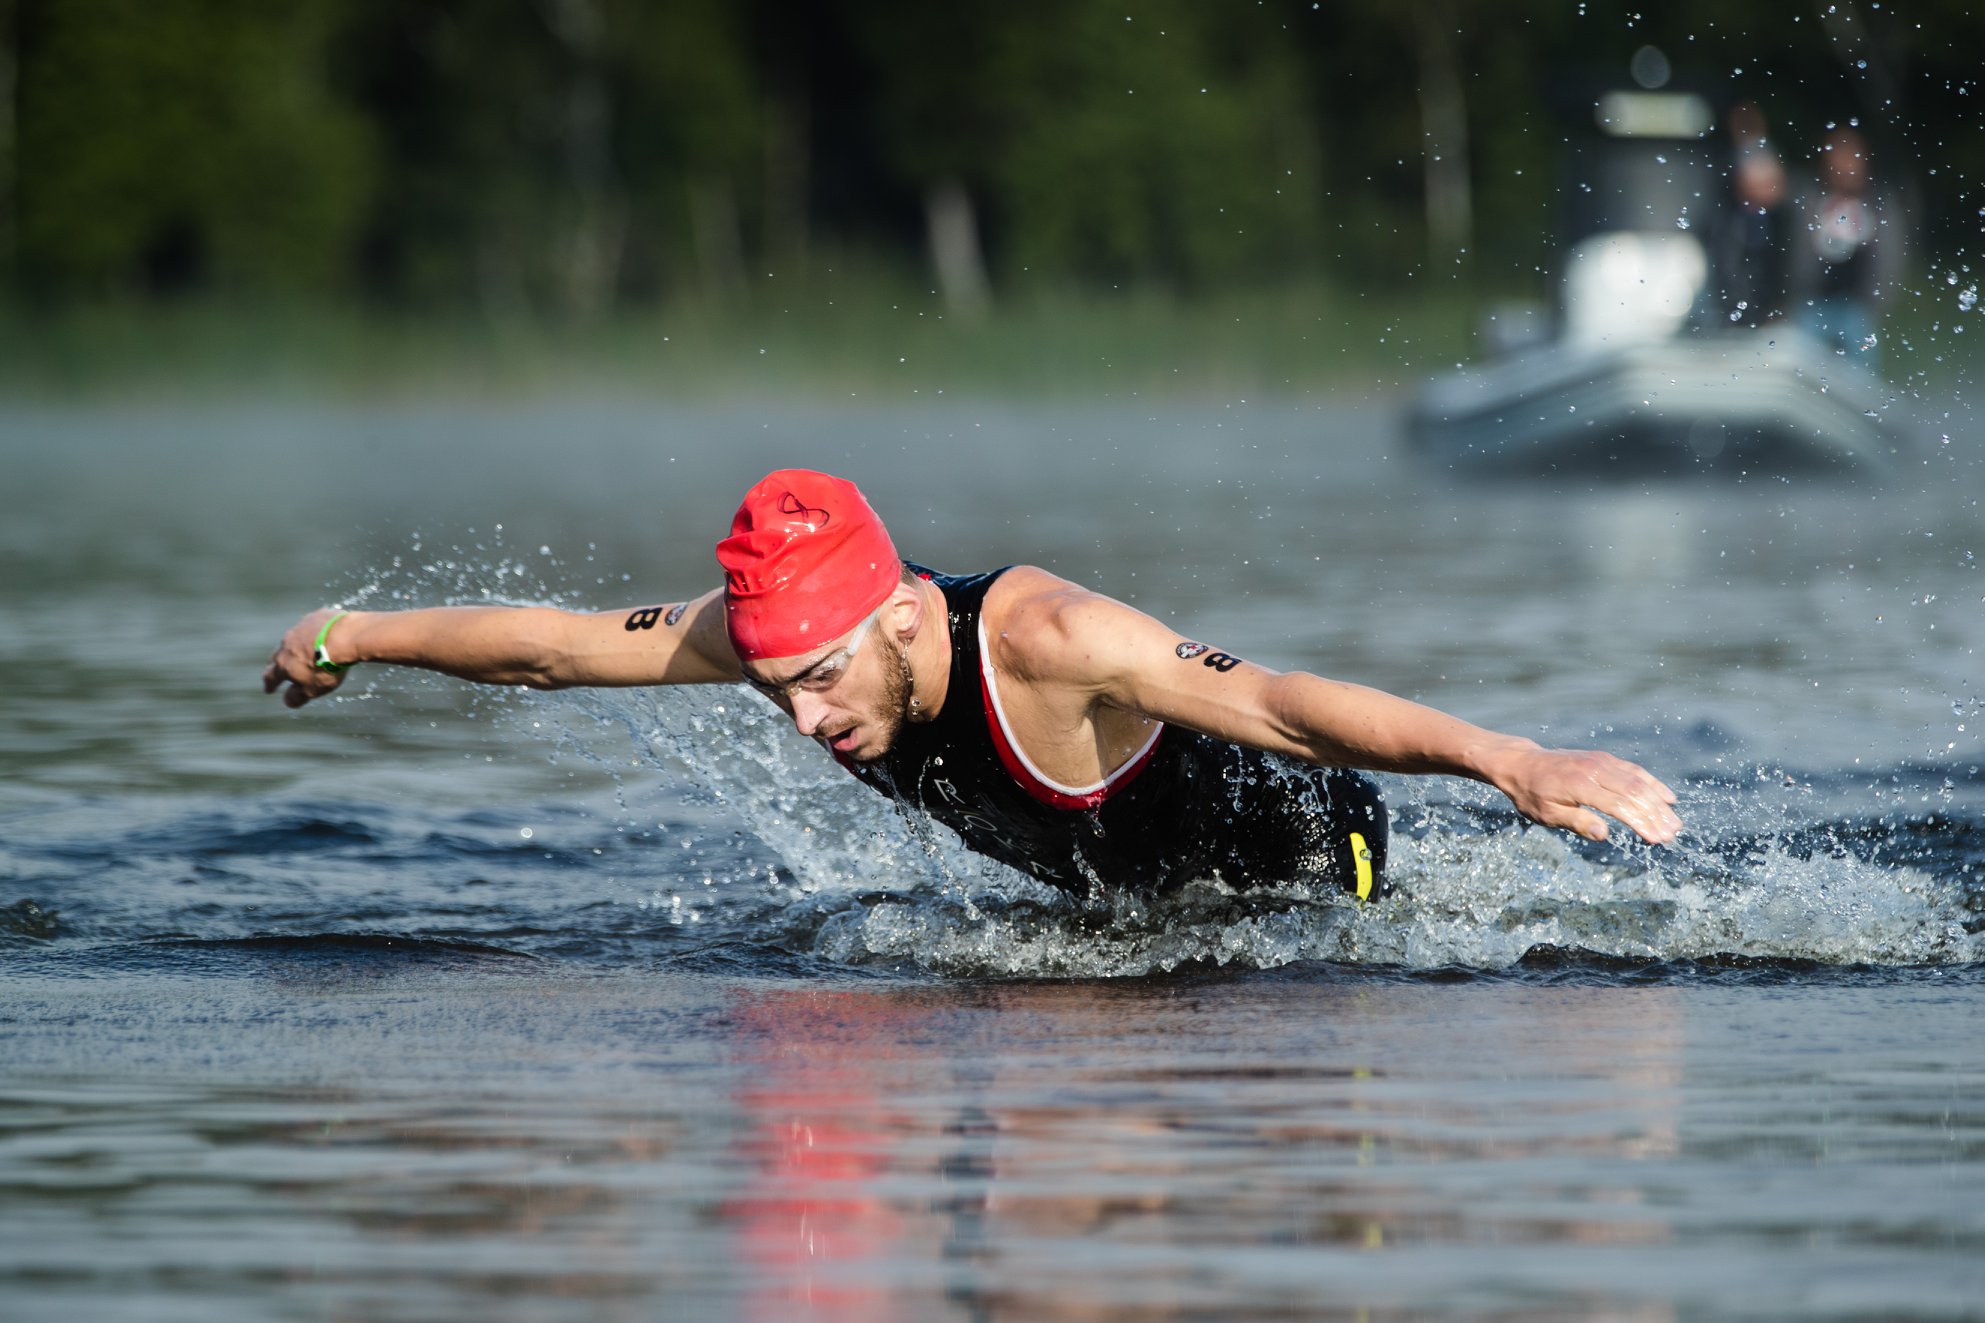 Coach_Terry_Wilson_Pursuit_of_The_Perfect_Race_IRONMAN_Mont_Tremblant_Cody_Beals_Swim.jpg